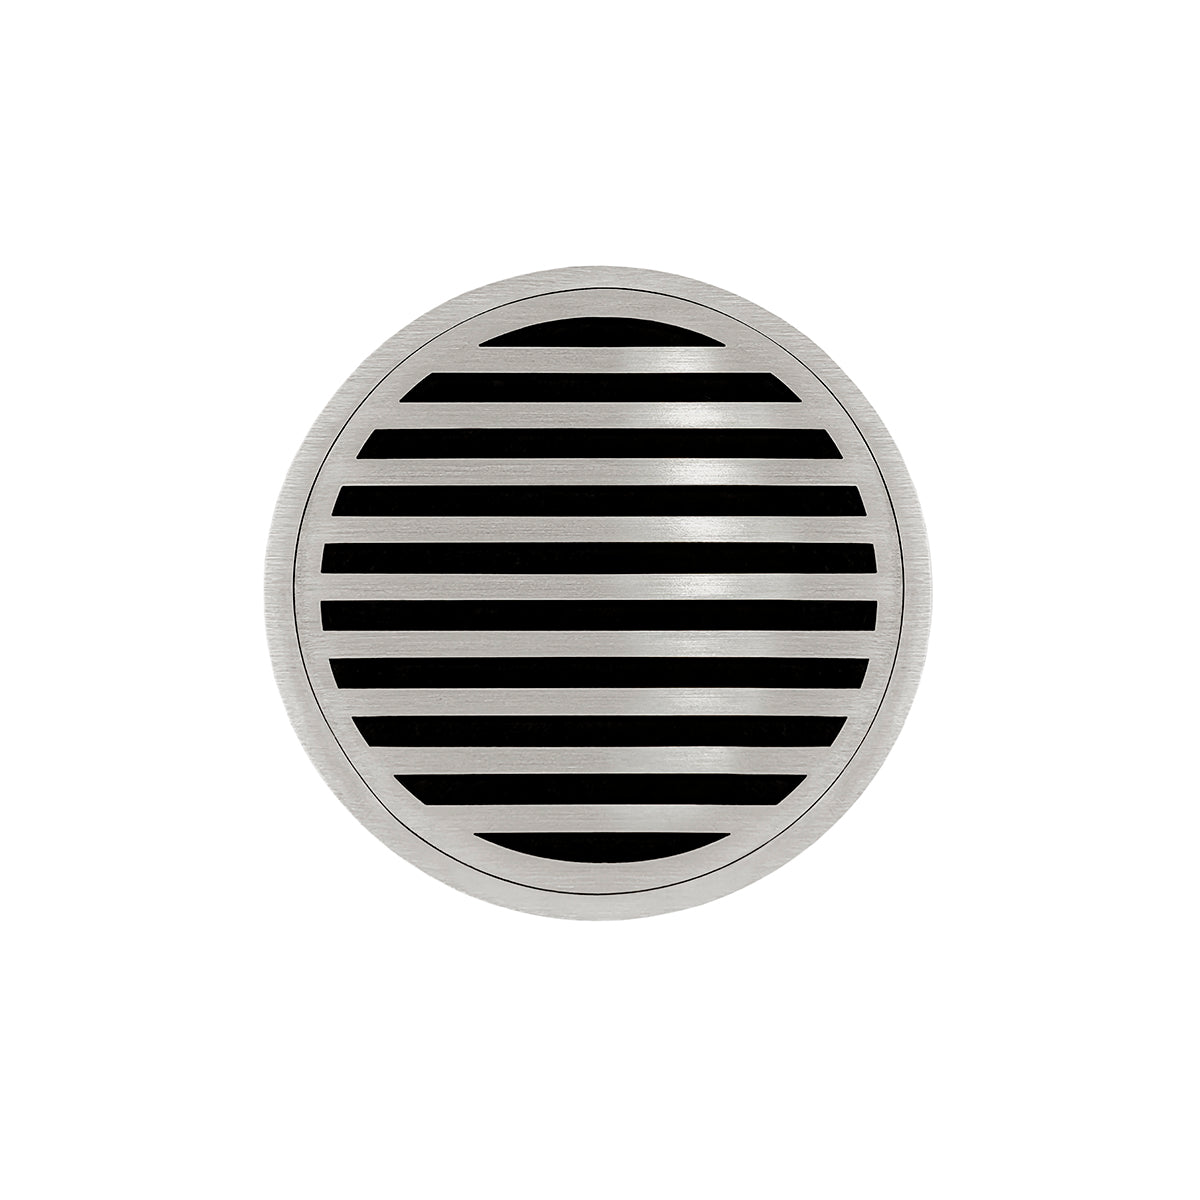 Infinity Drain 5" Round Strainer Premium Center Drain Kit with Lines Pattern Decorative Plate and 2" Throat for RND 5